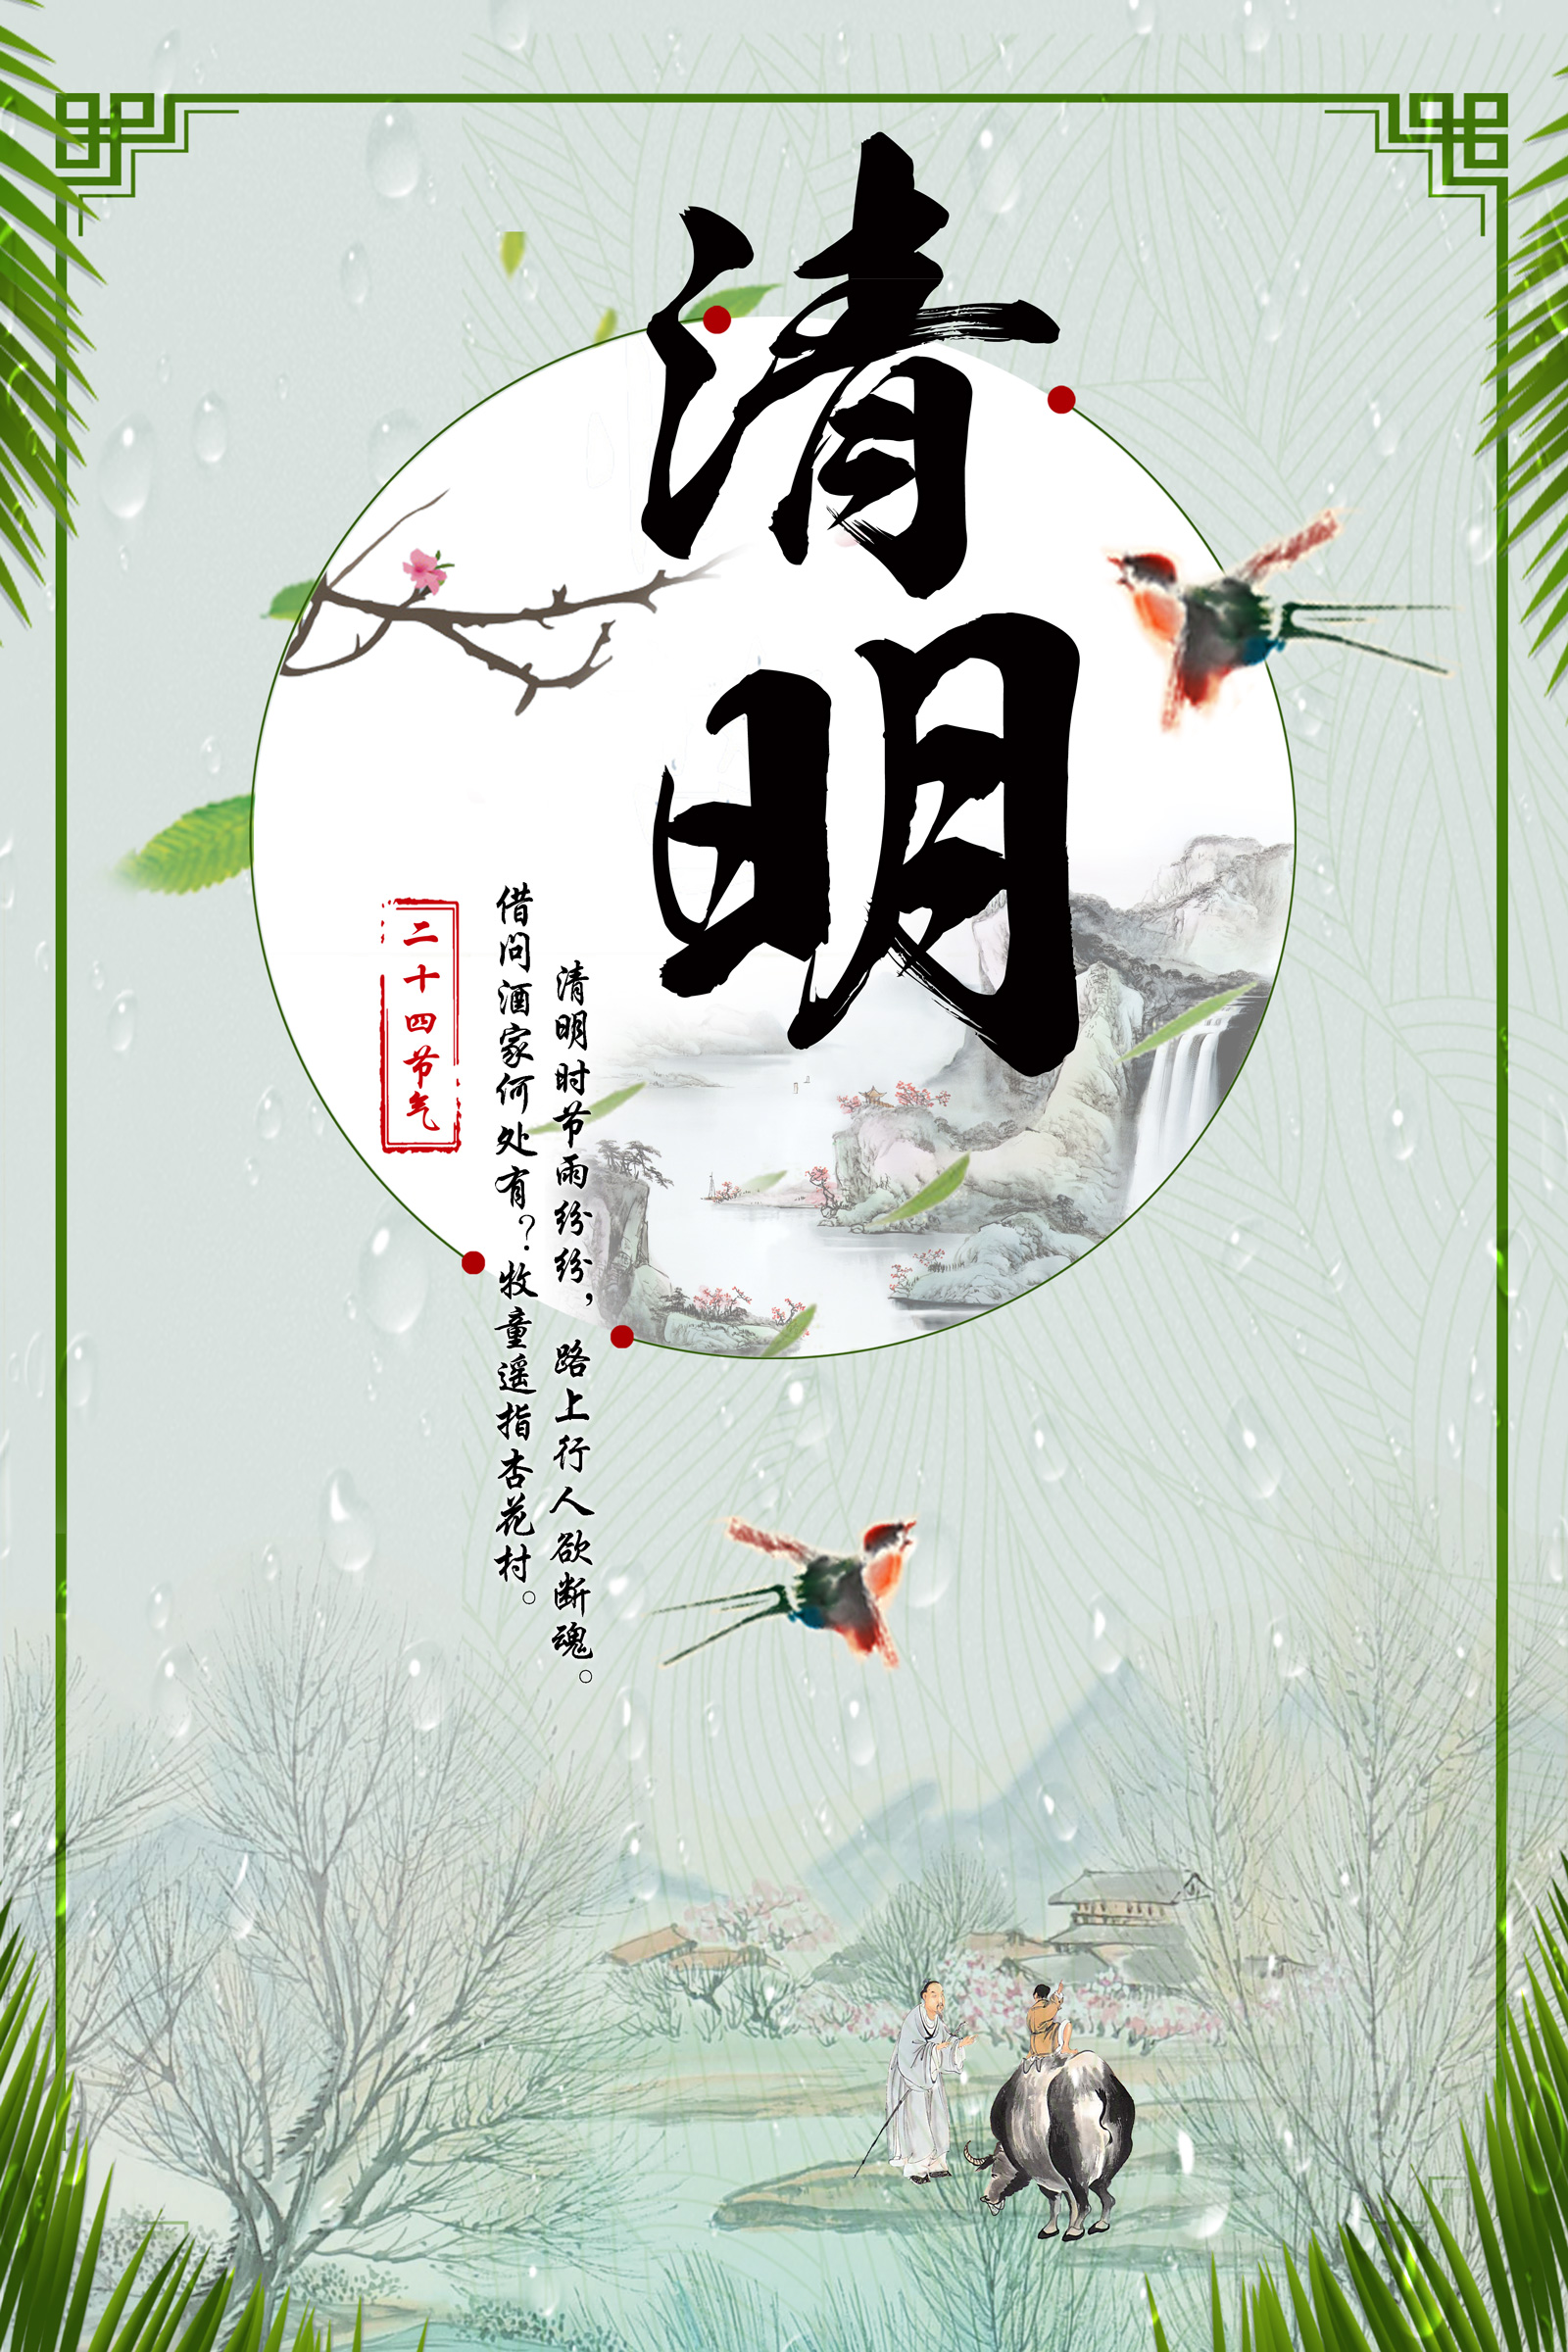 Chinese traditional ink painting style Qingming season poster PSD material File Free Download #.3